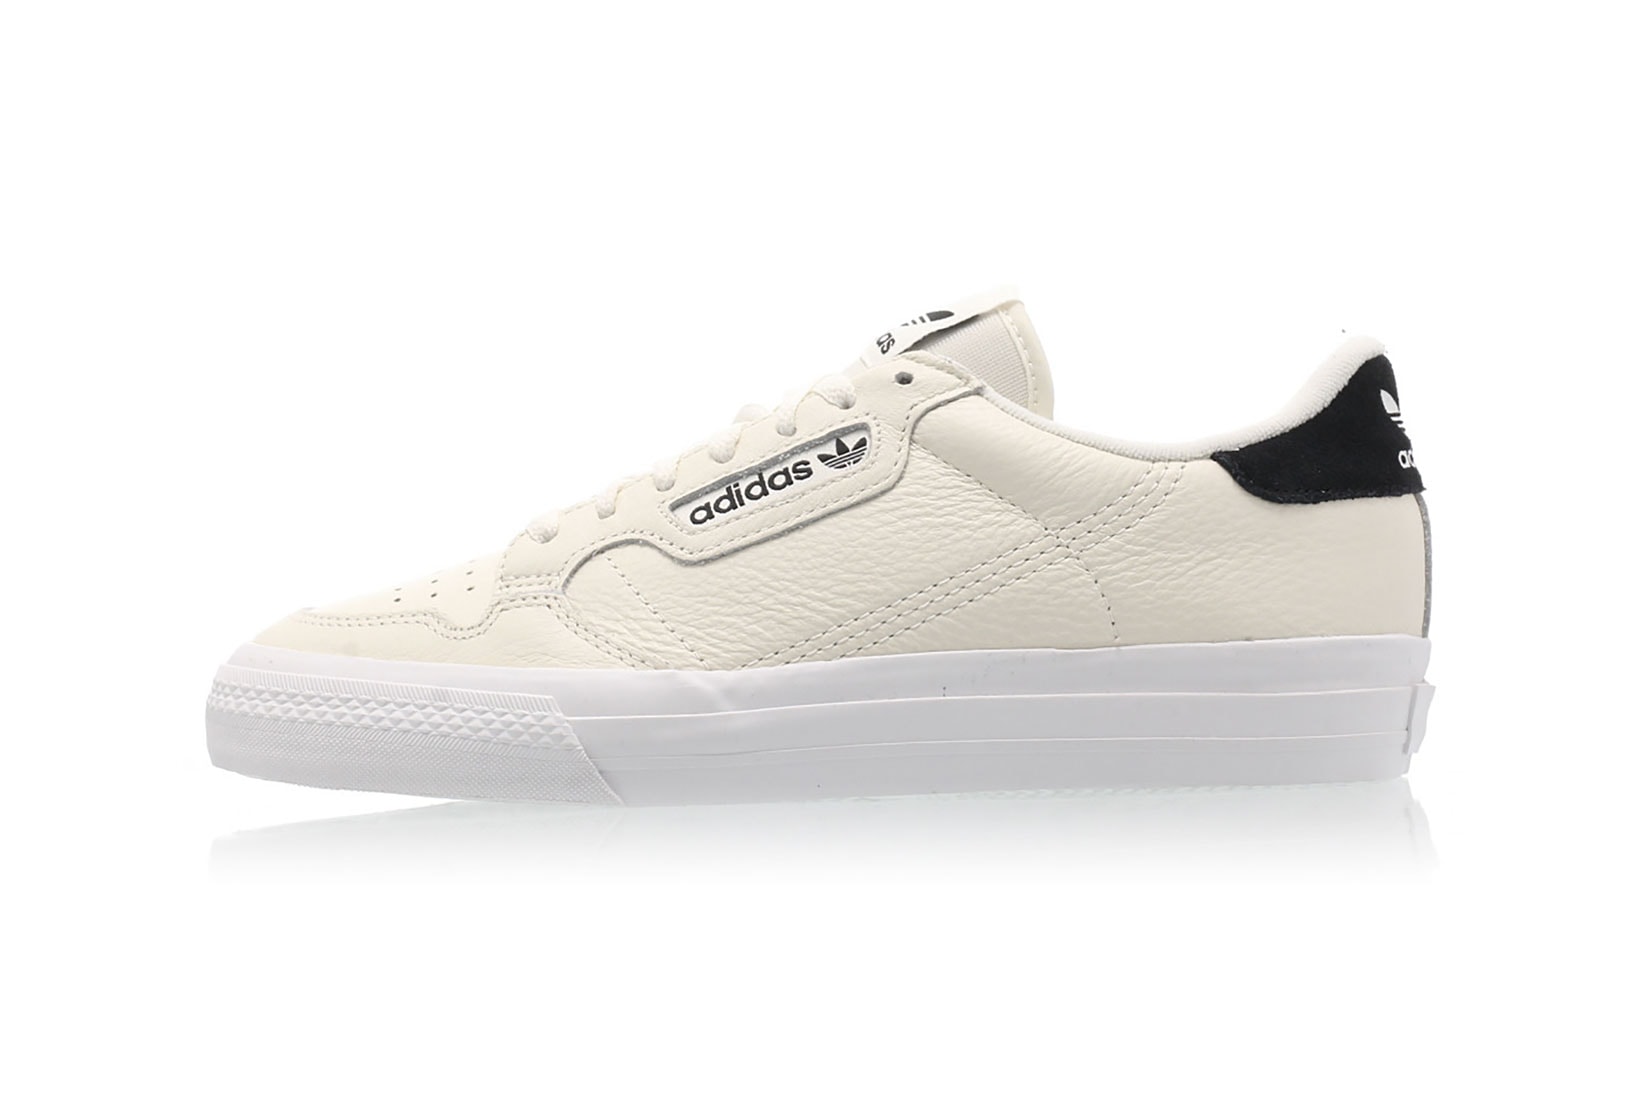 Adidas Continental 80 in Off-White. Not hyped, but I like them a